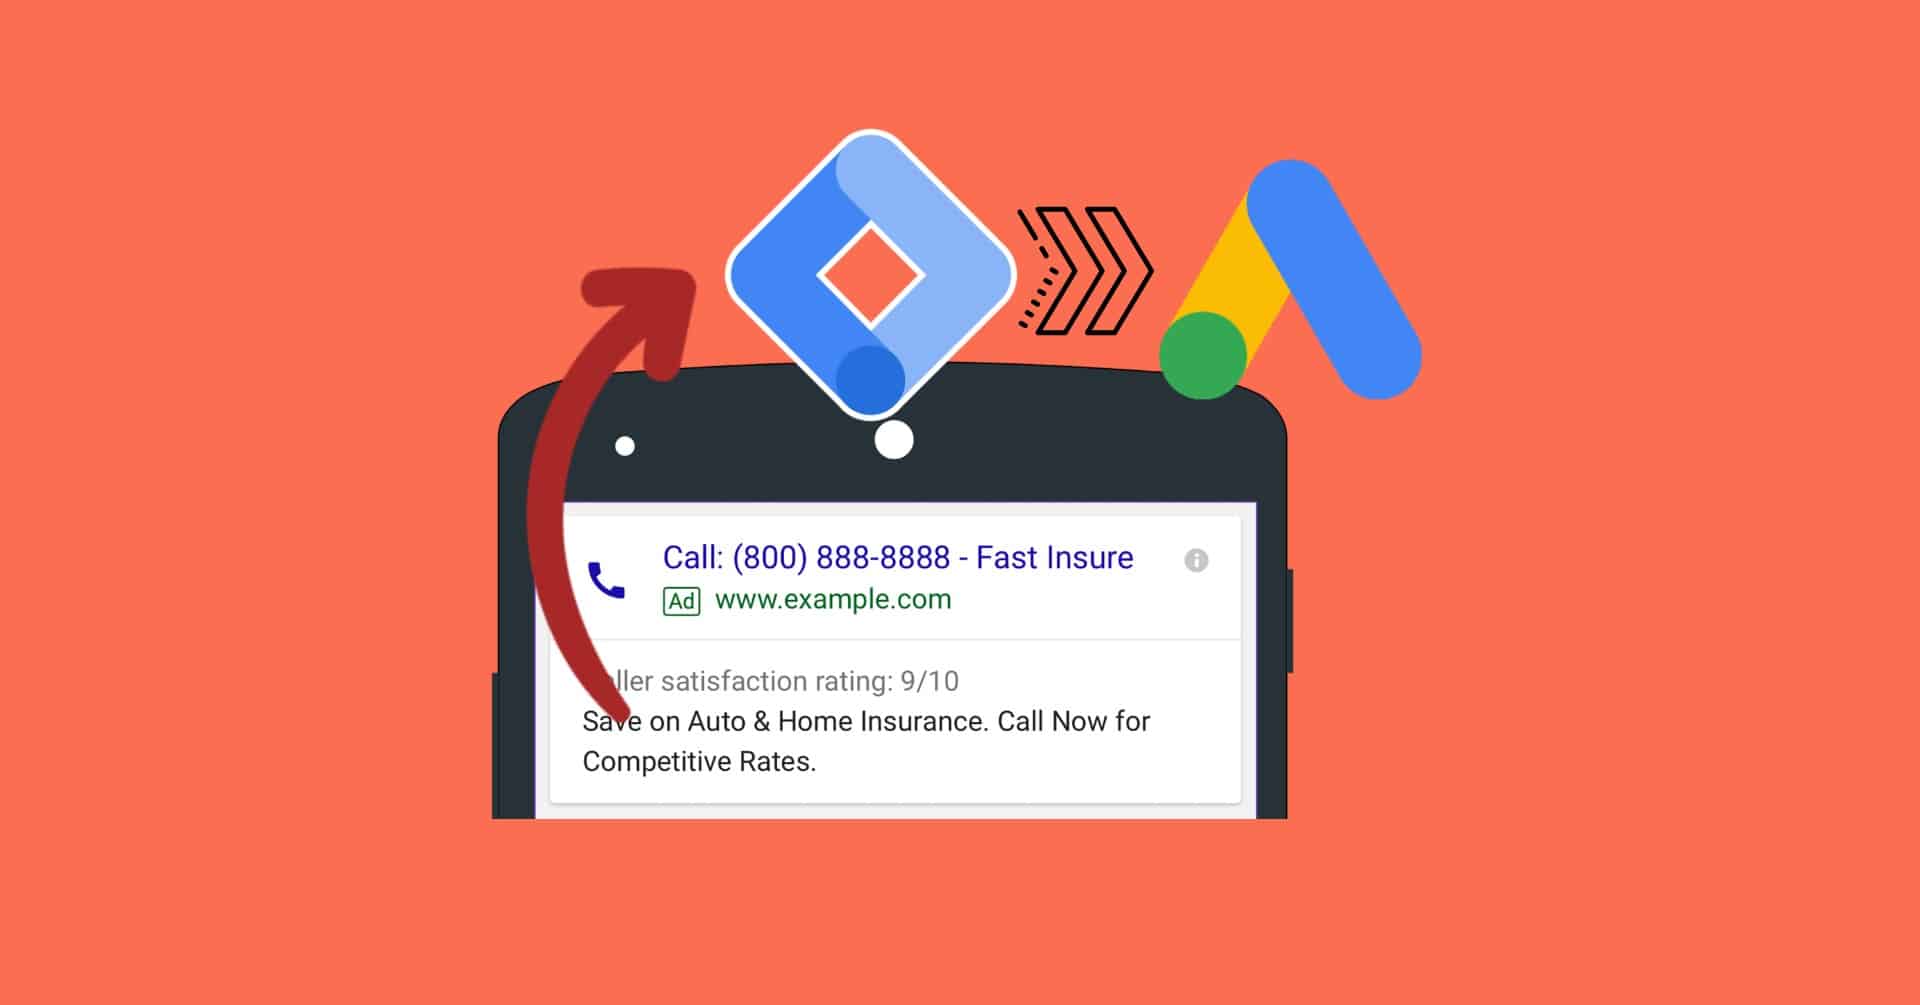 Track phone calls with Google ads